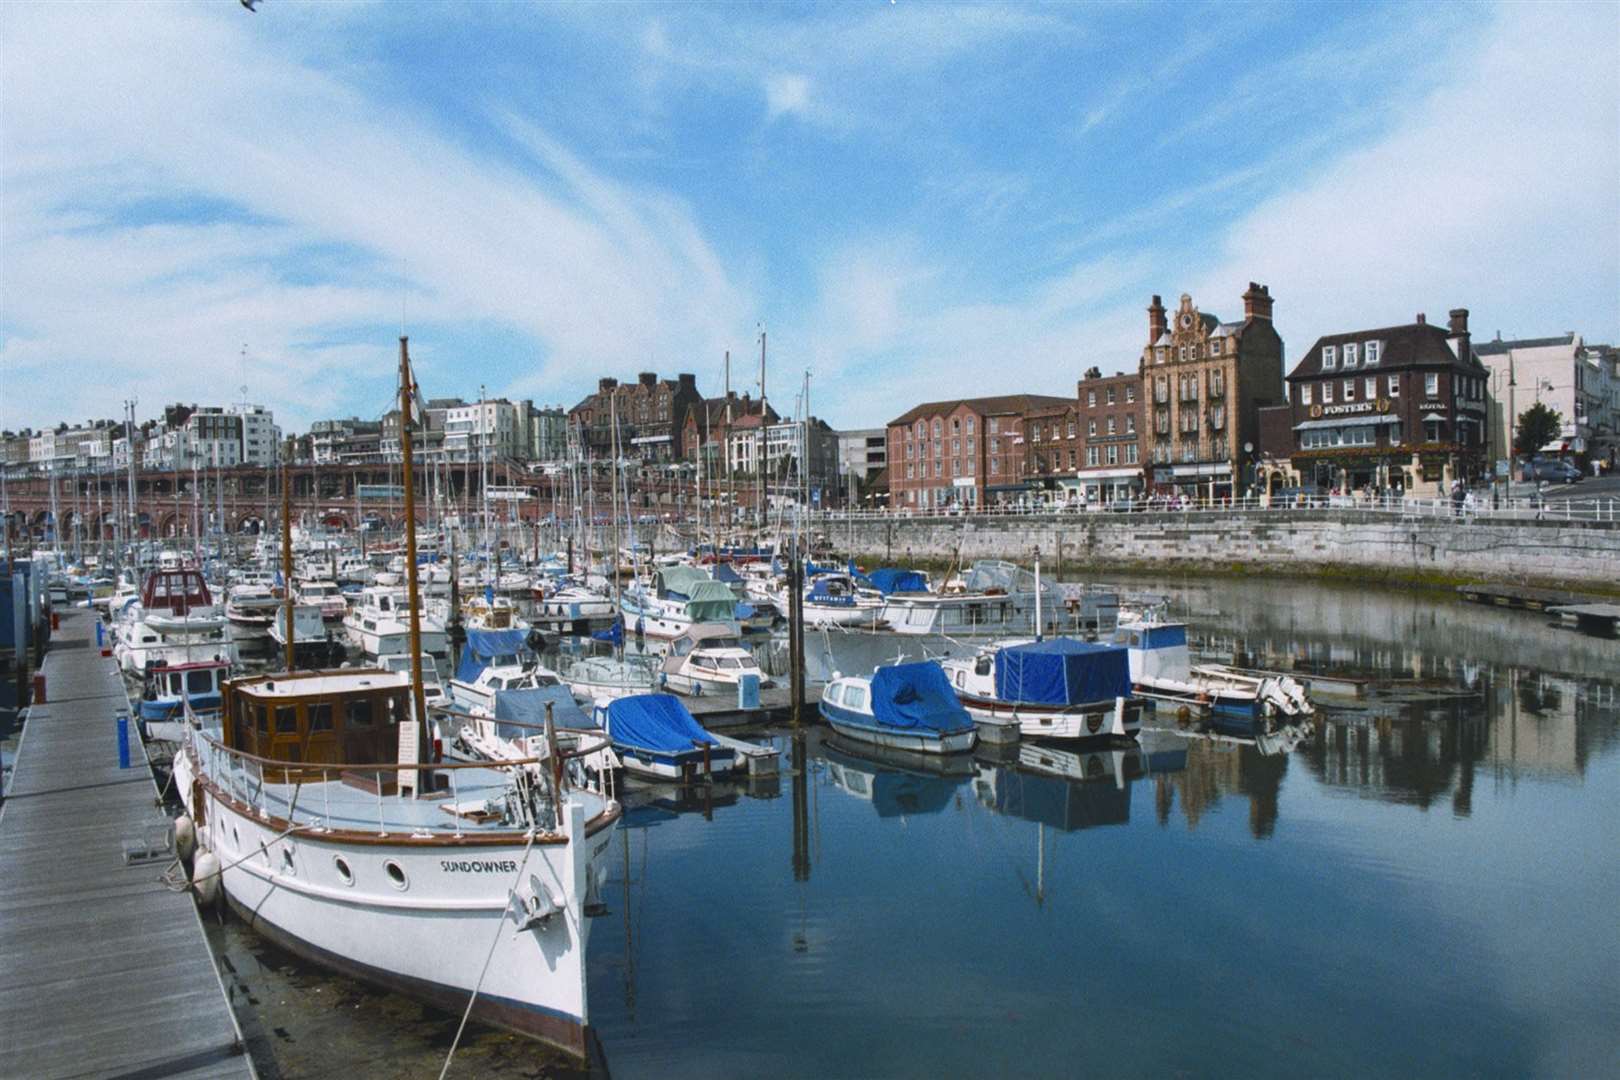 Active Ramsgate is estimated to have boosted the town's economy by £1.2 million